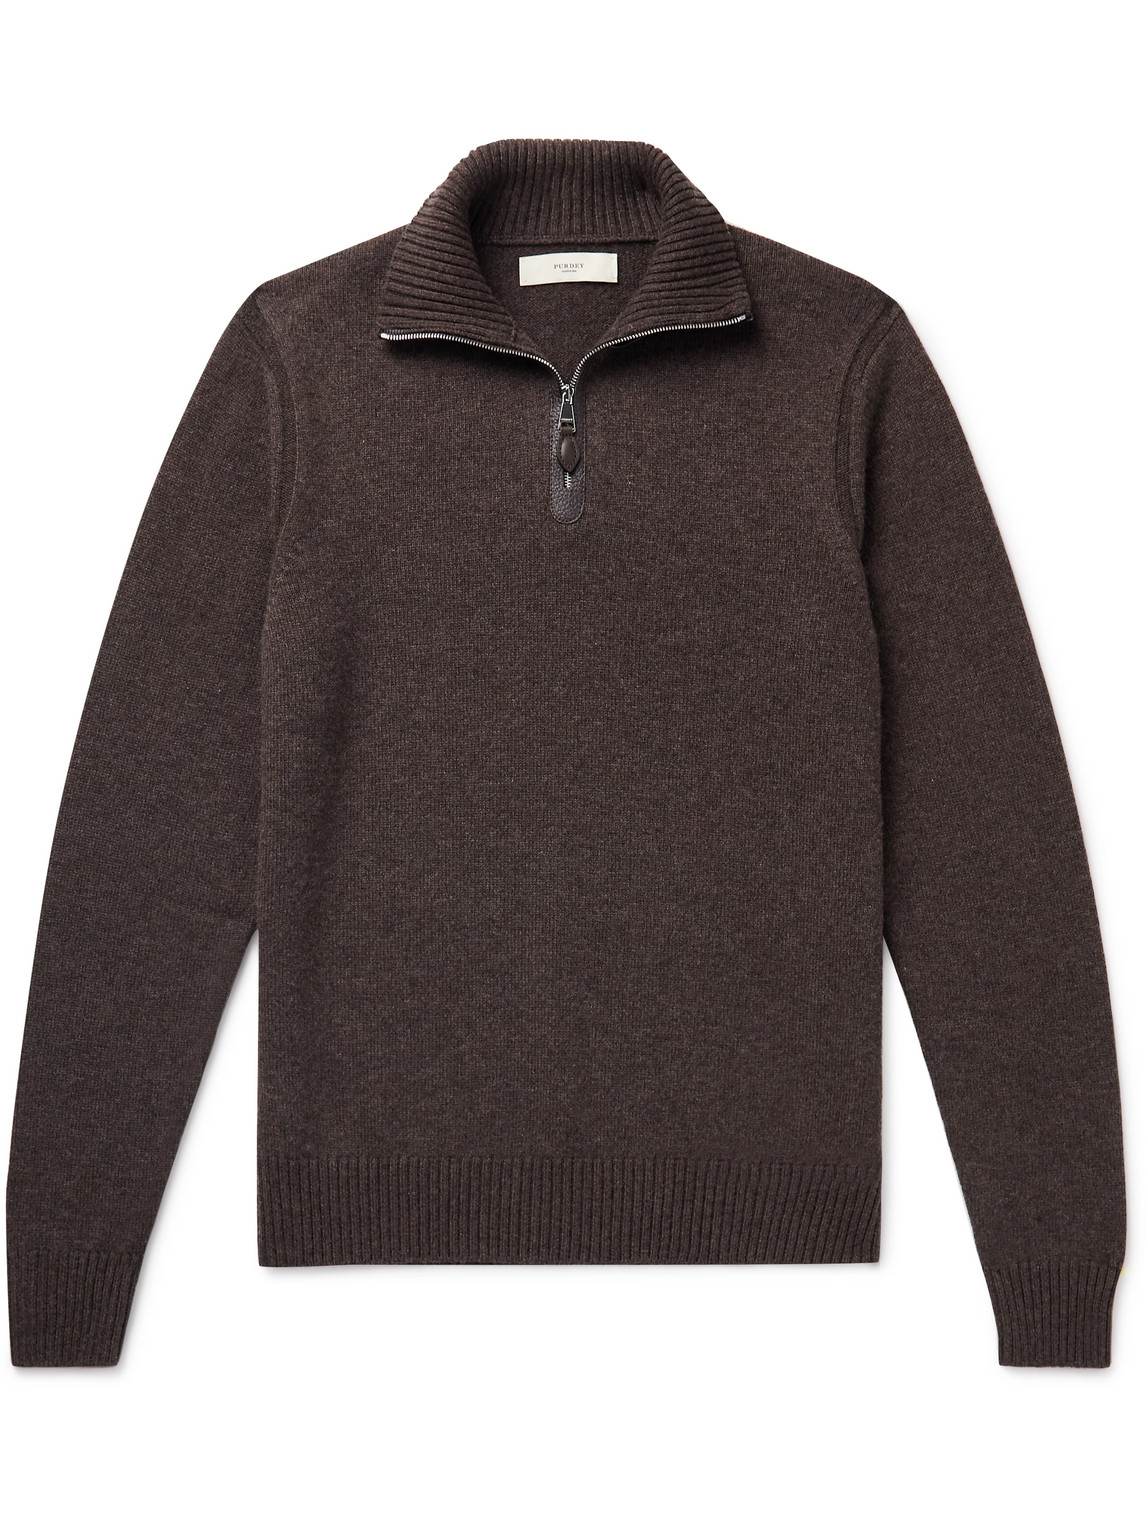 Purdey Leather-trimmed Cashmere Half-zip Sweater In Brown